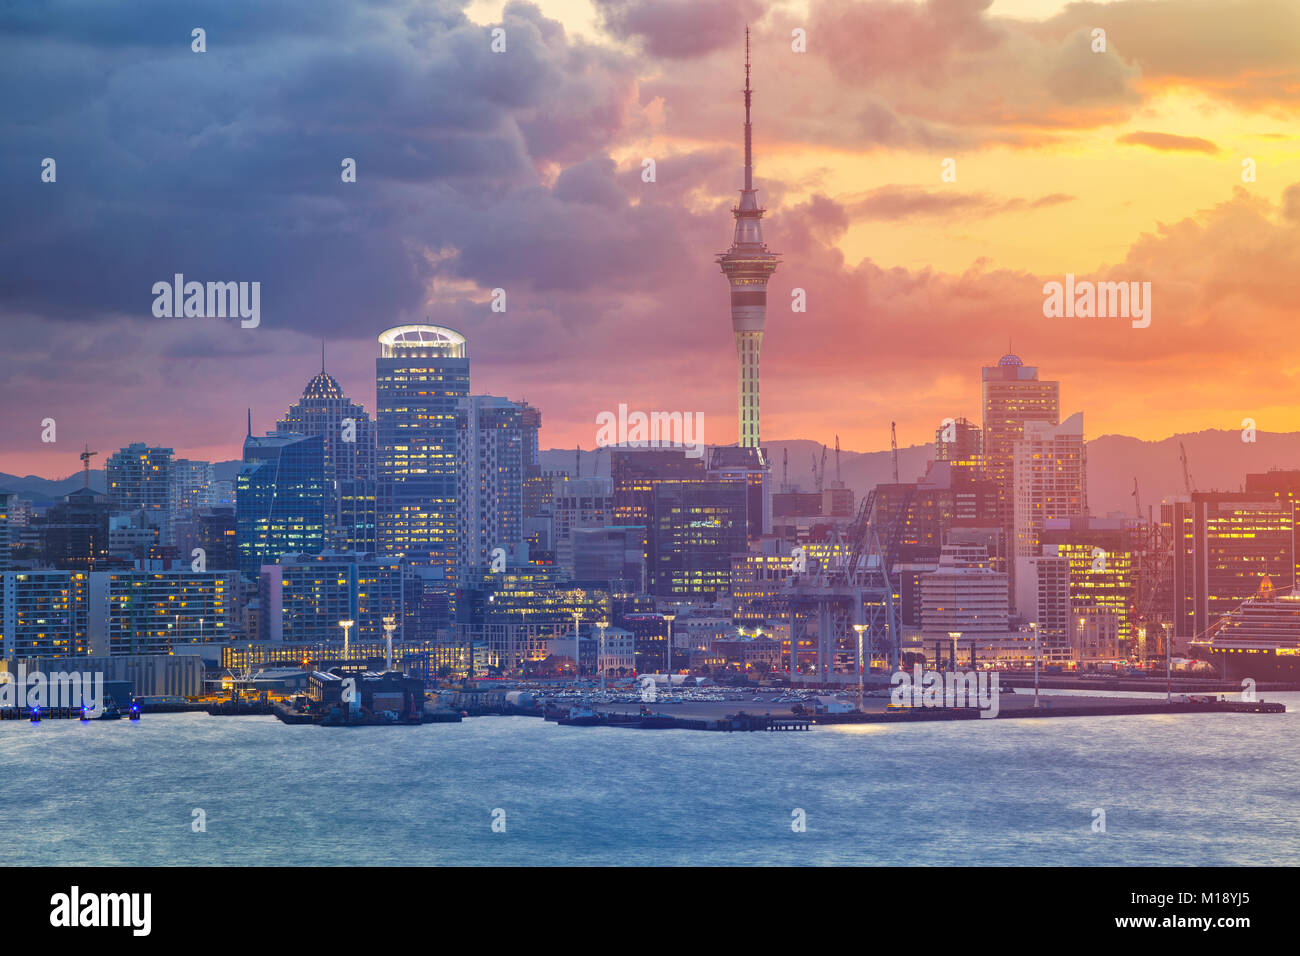 Auckland. Cityscape image of Auckland skyline, New Zealand during sunset. Stock Photo